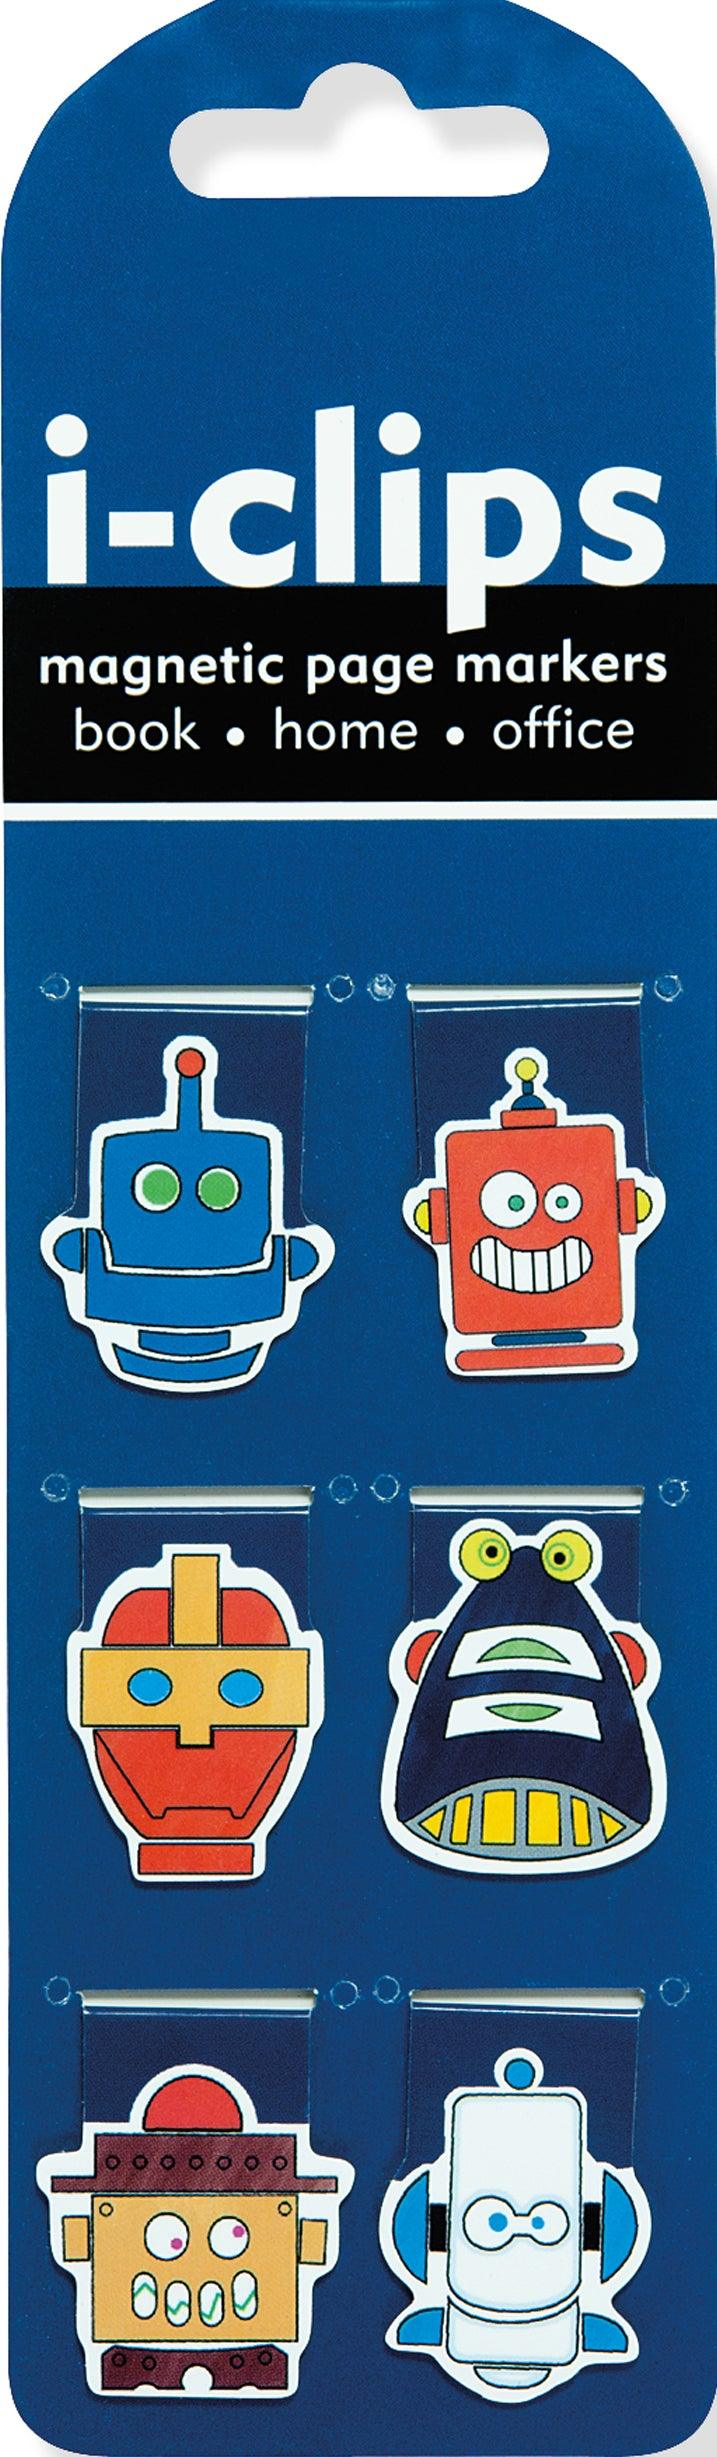 i-Clips Magnetic Page Markers: Robots - SpectrumStore SG